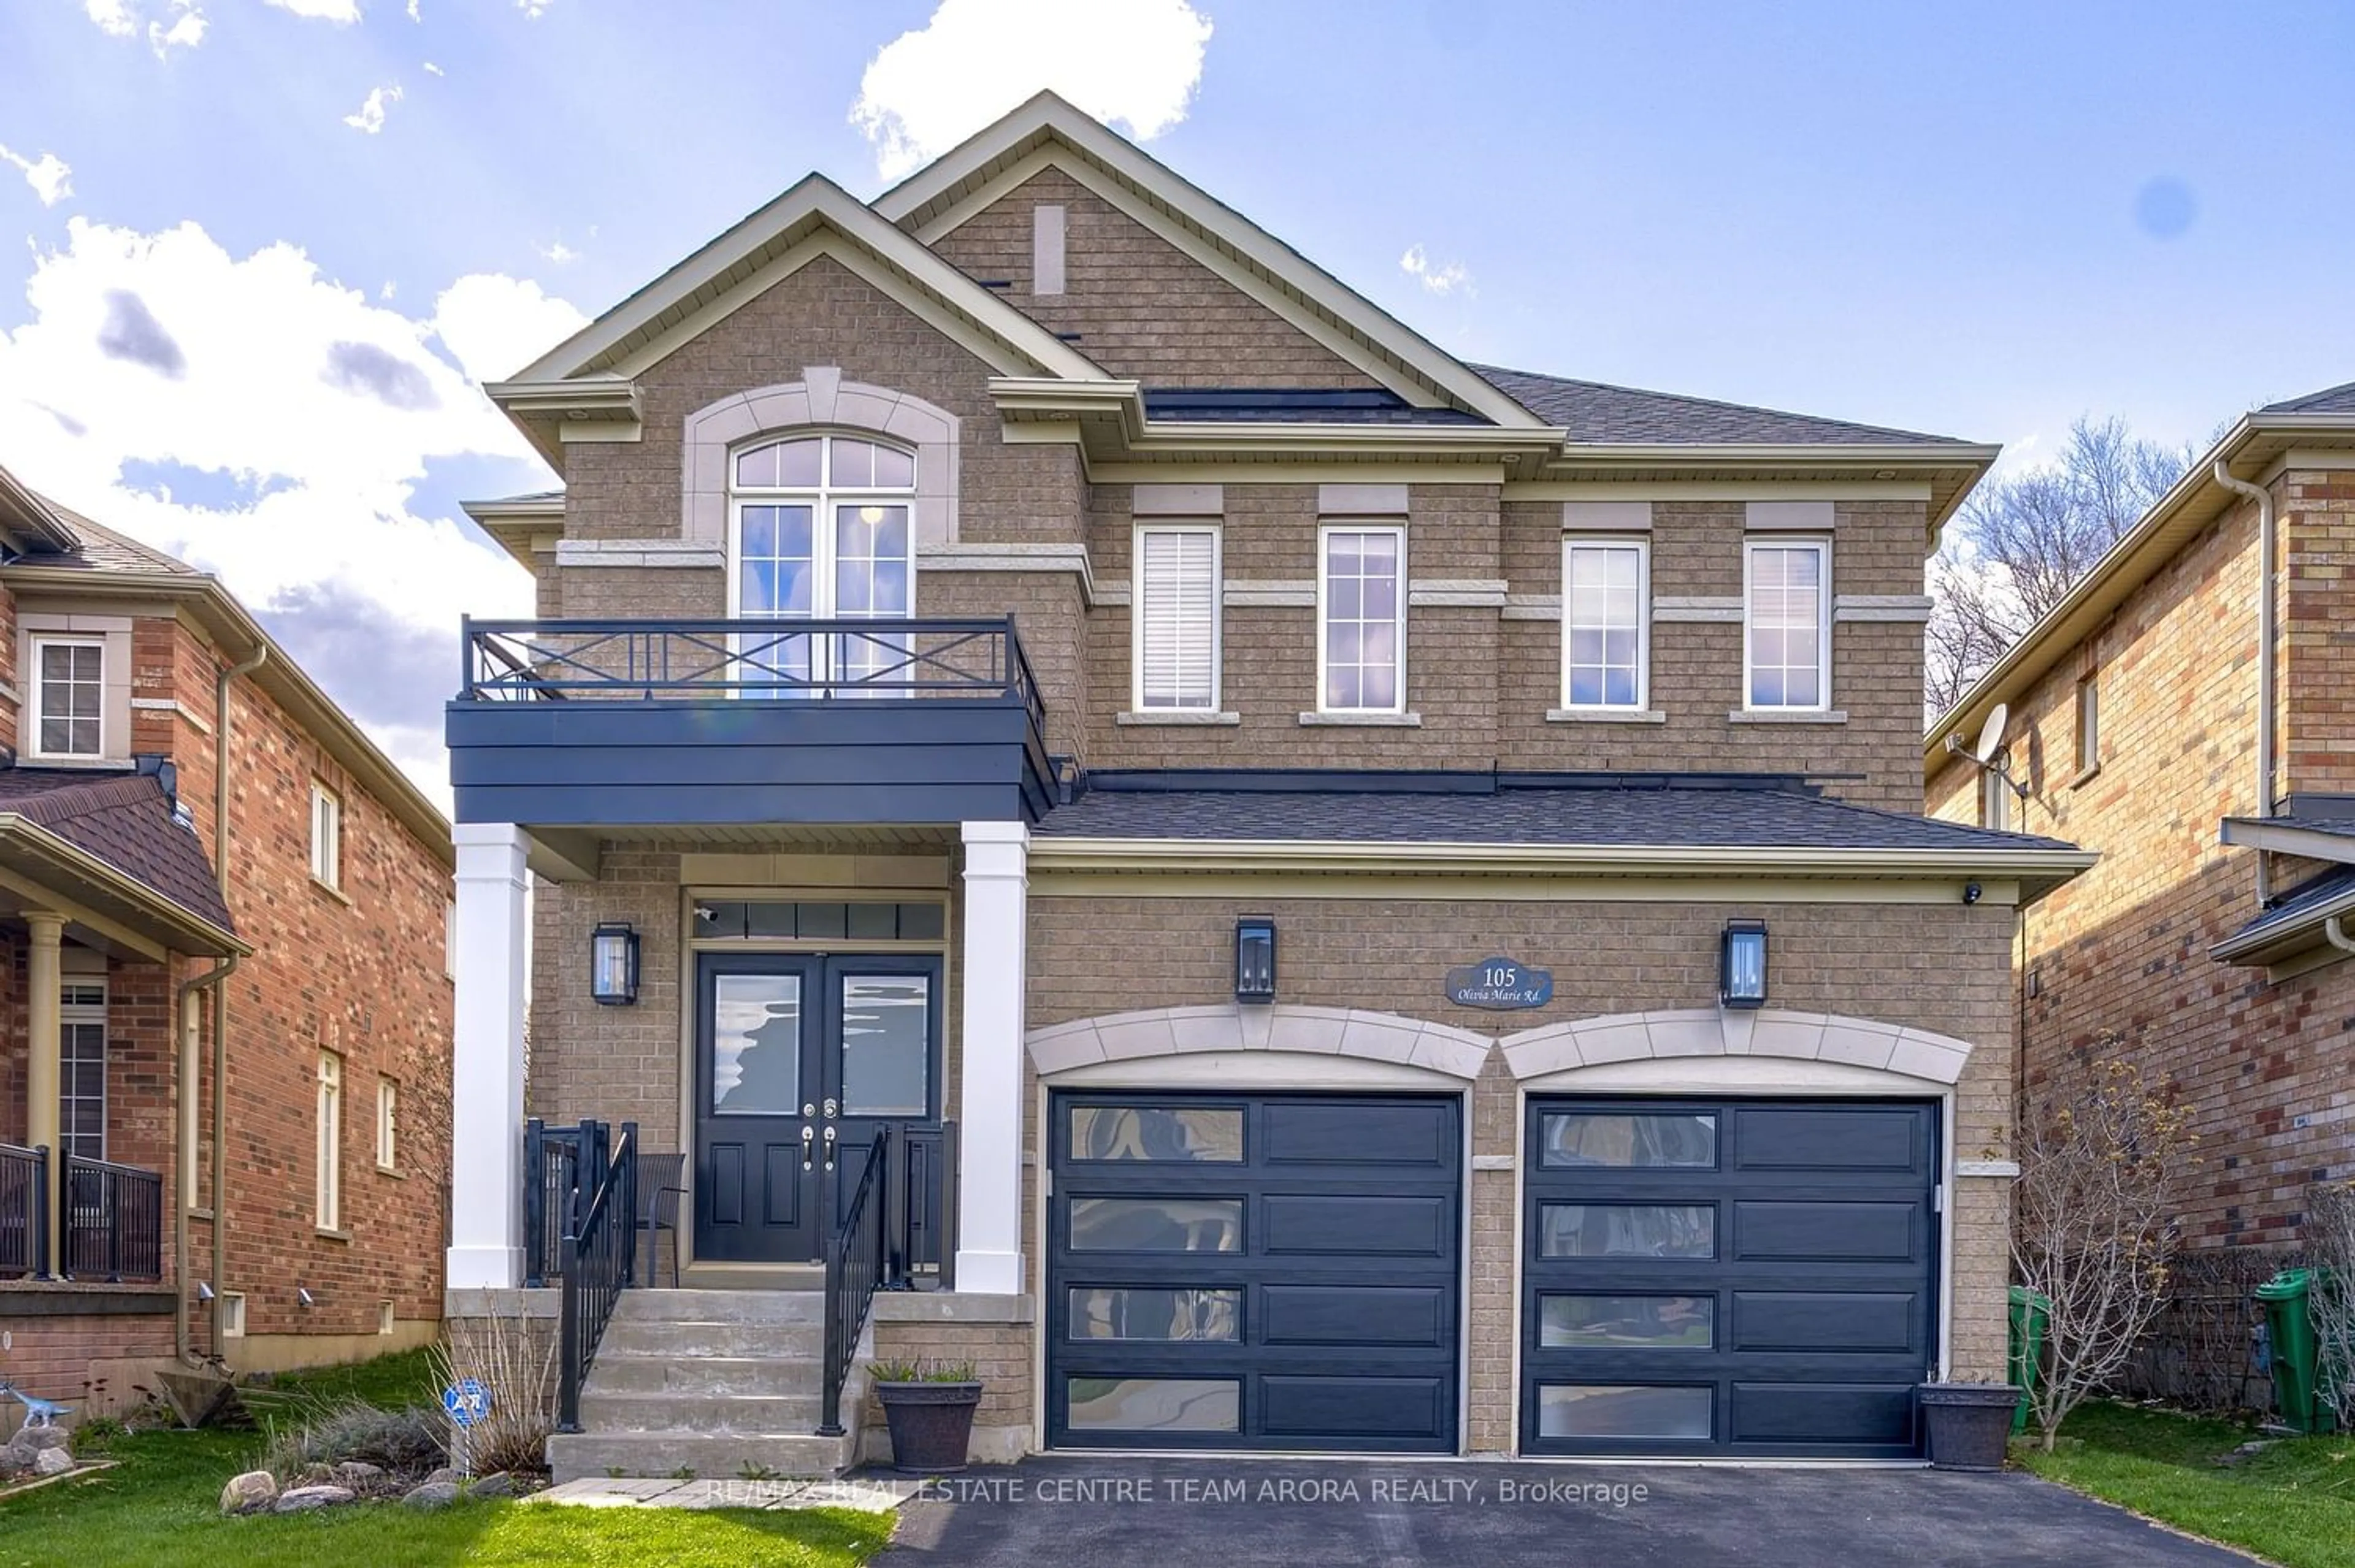 Home with brick exterior material for 105 Olivia Marie Rd, Brampton Ontario L6Y 0N1